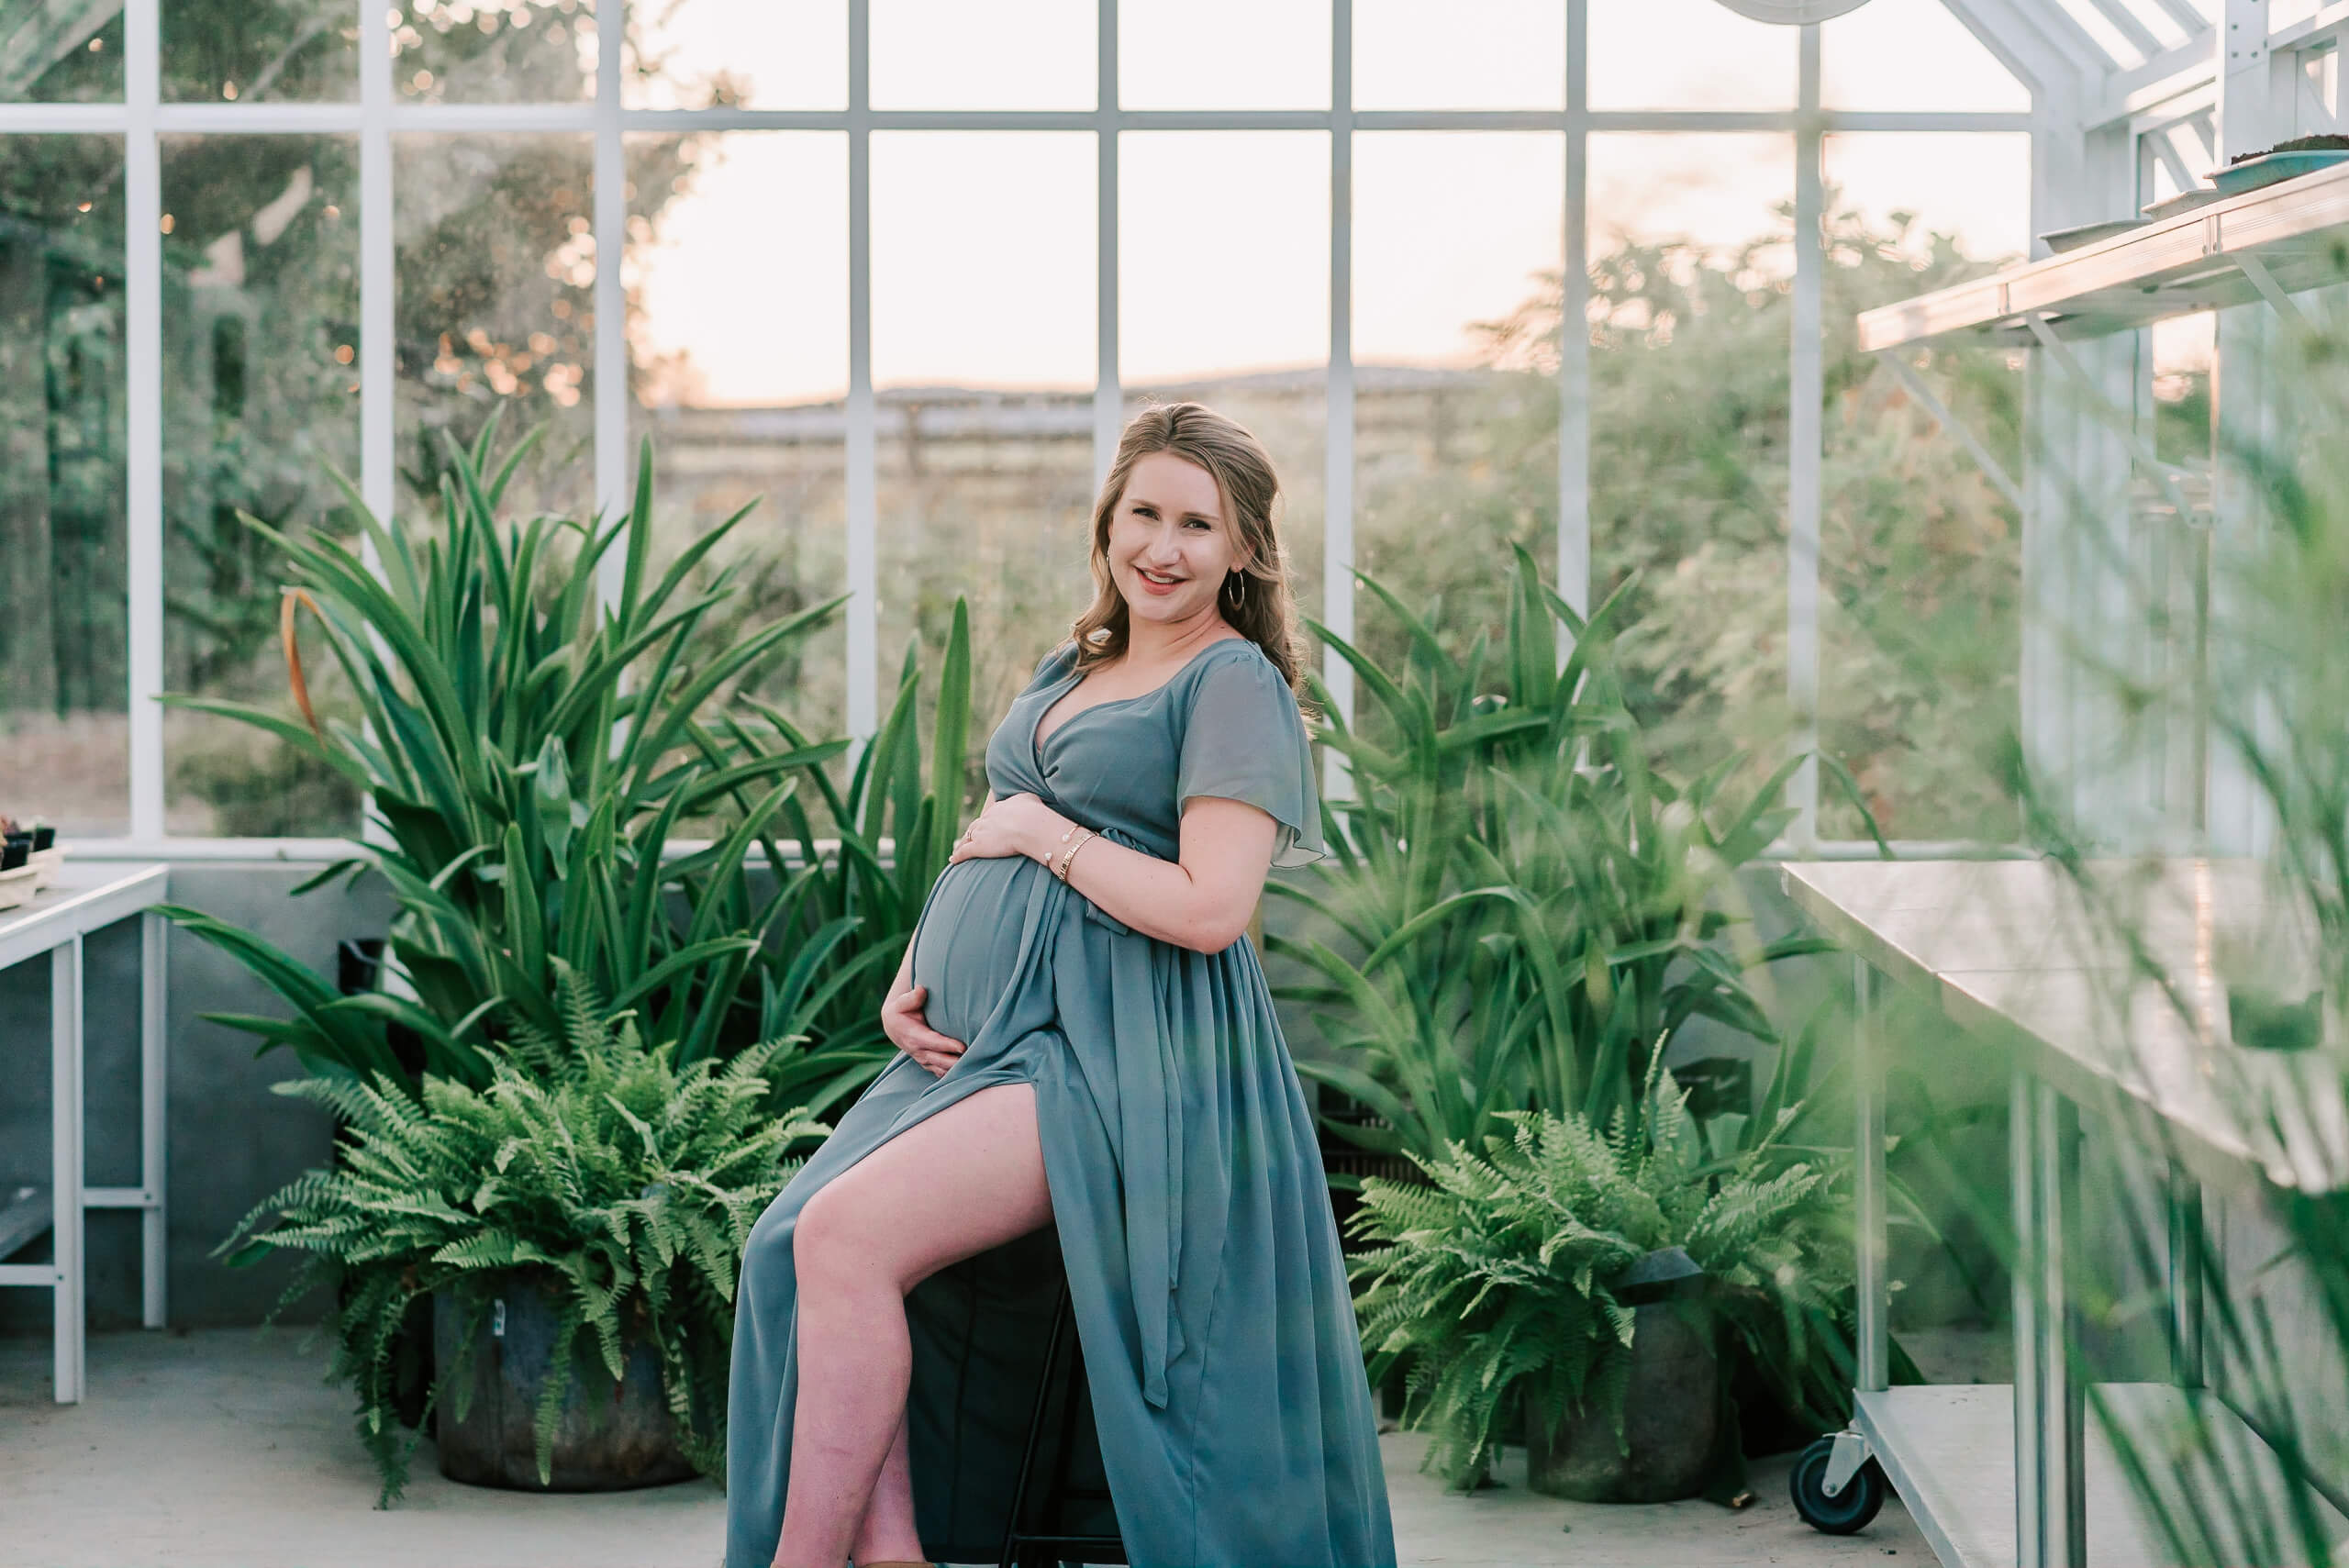 A mom to be in a blue maternity gown sits on a stool in a greenhouse holding her bump bellies & babies